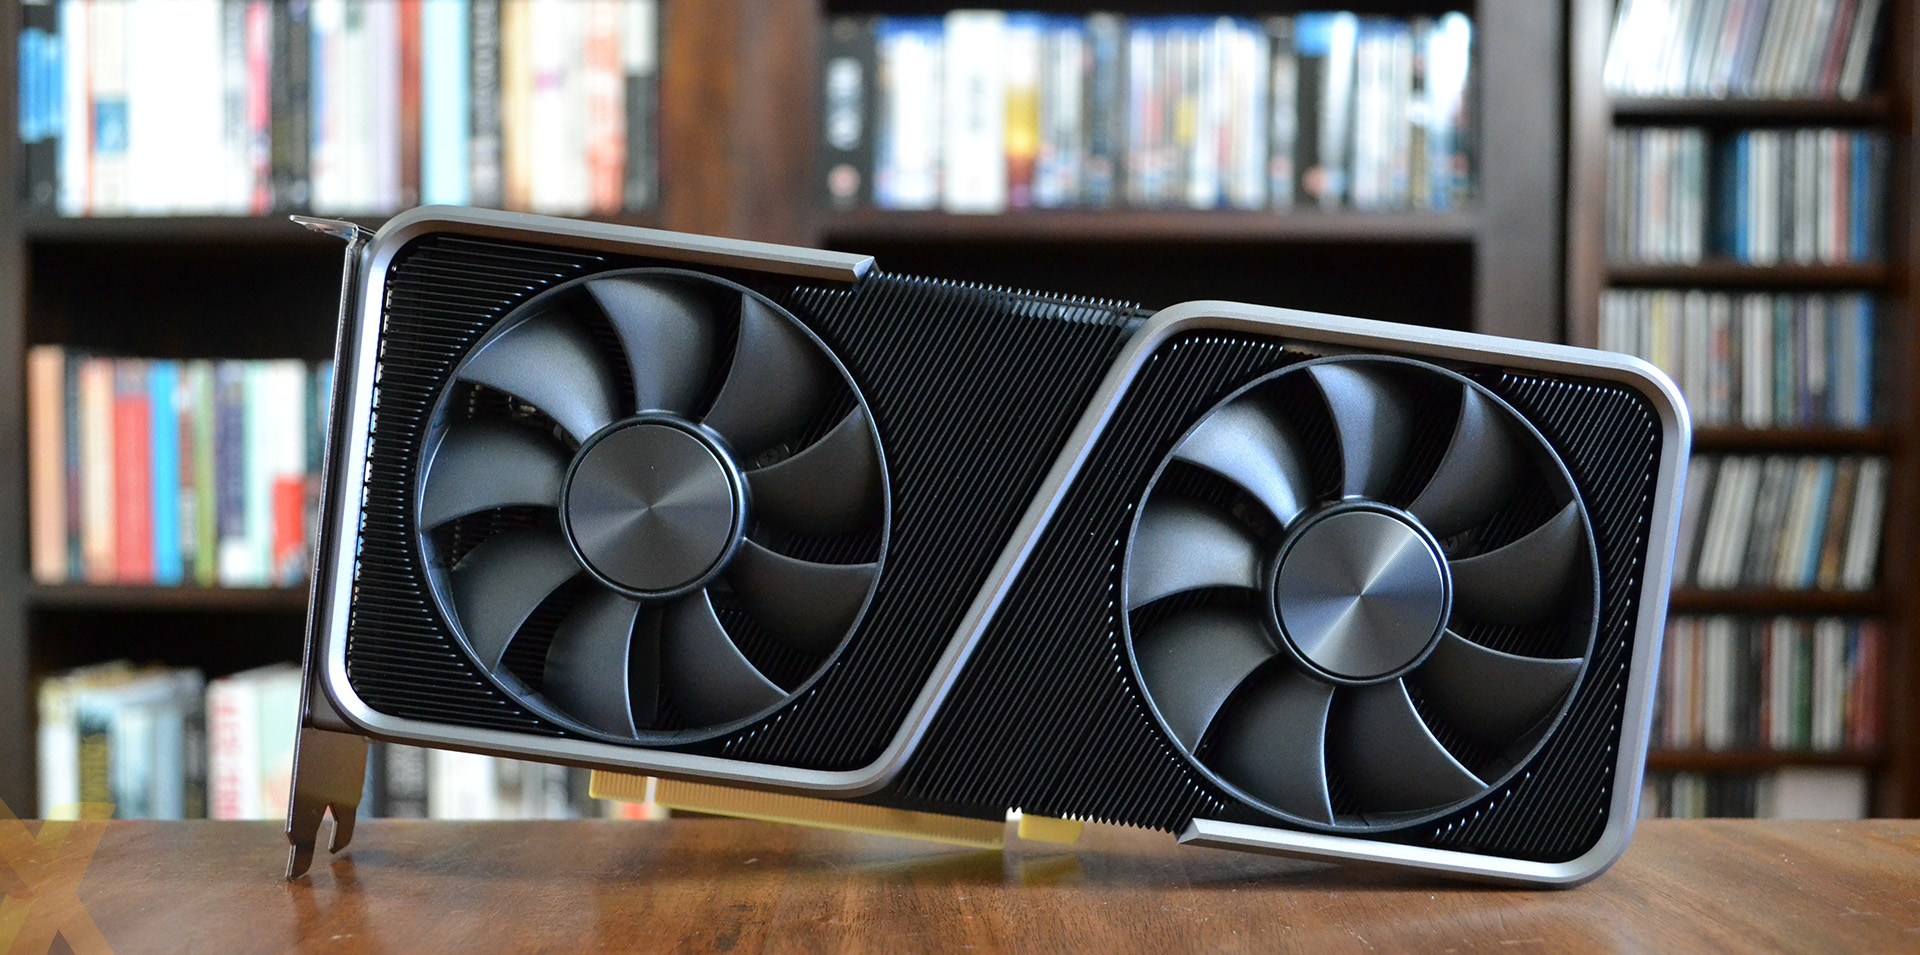 Review: Nvidia GeForce RTX 3070 Founders Edition - Graphics 